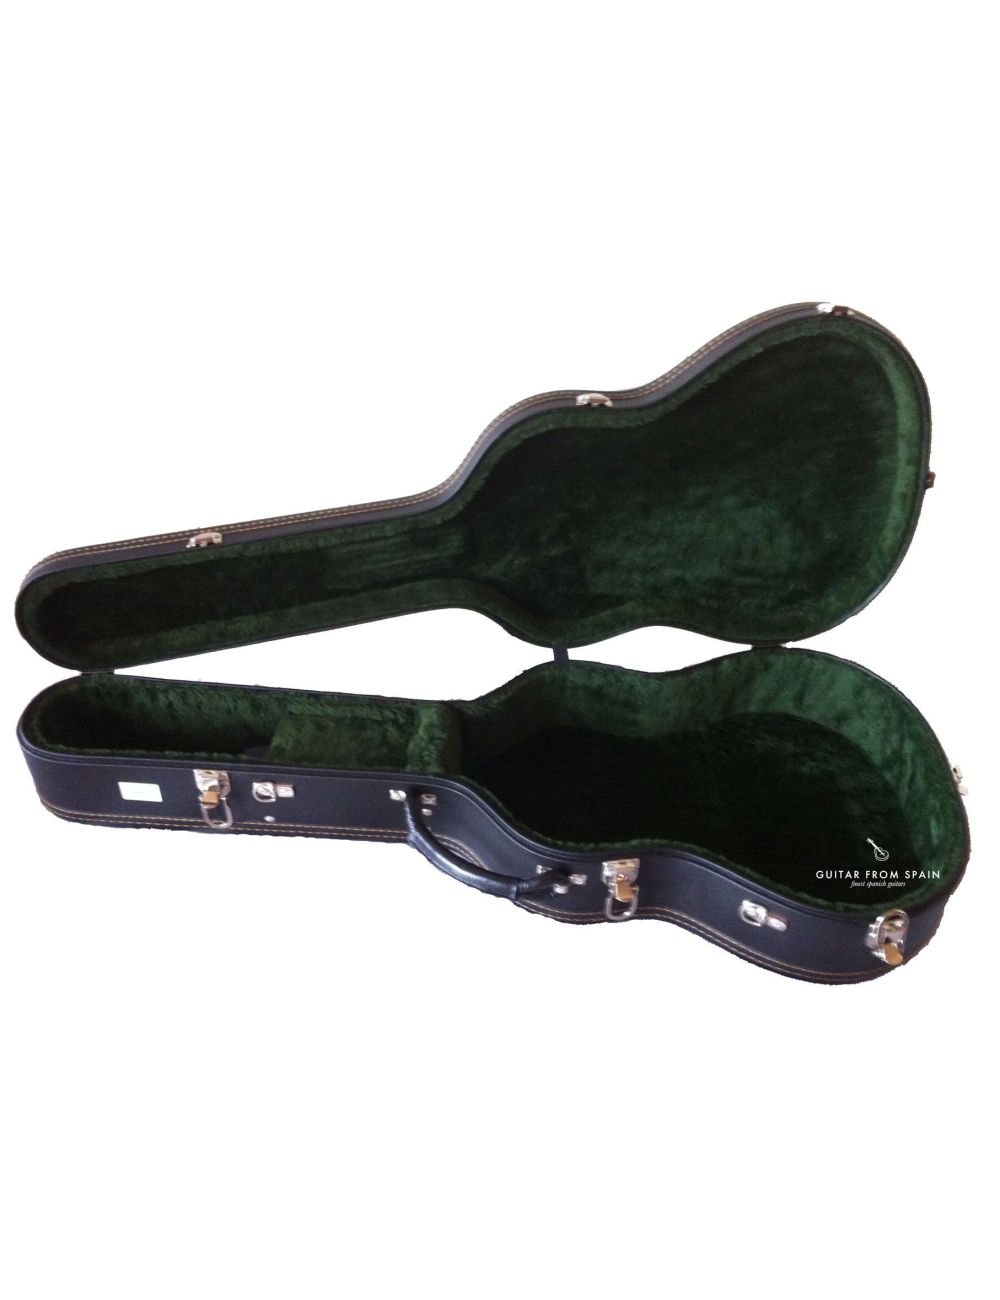 Alhambra 9570 3/4 Classical guitar case 9570 Special sizes